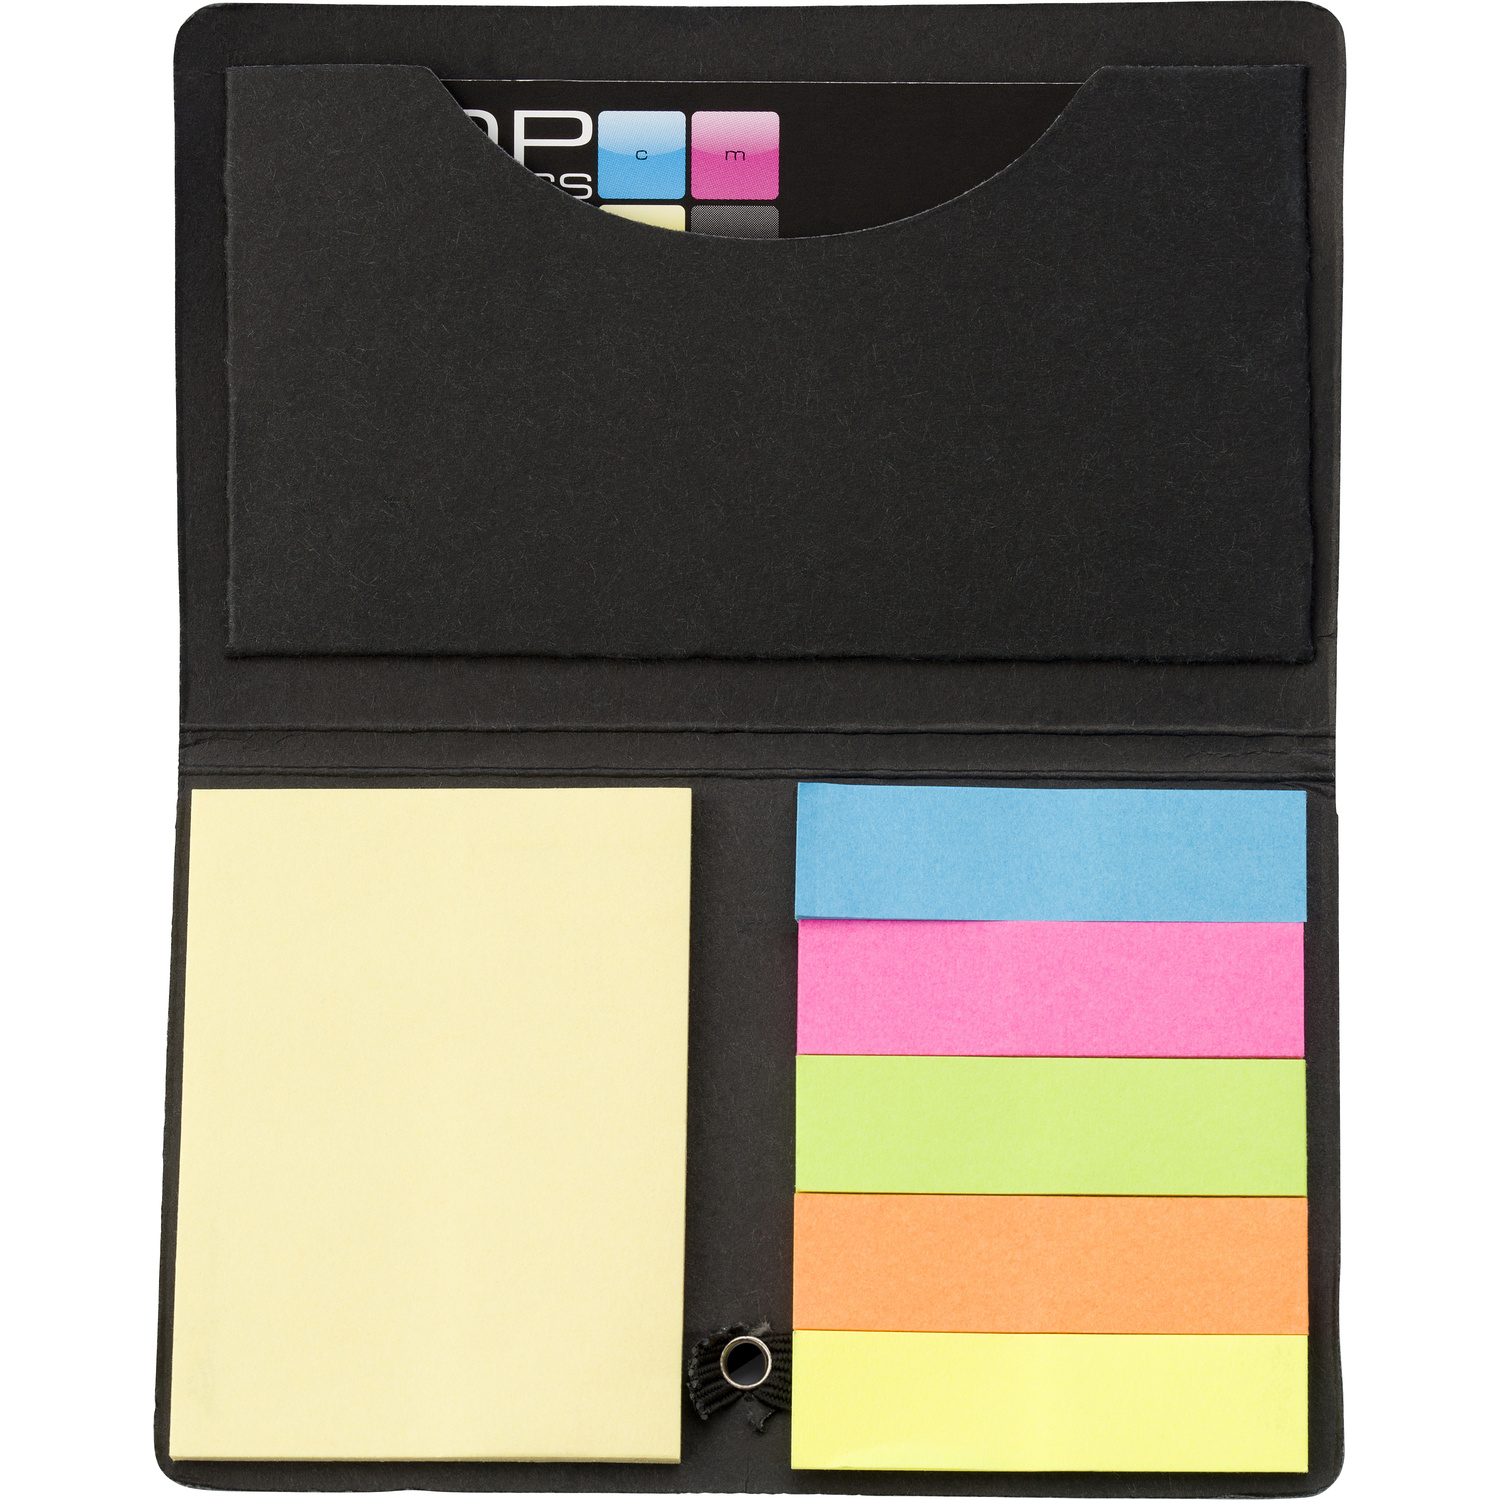 005348 001999999 2d090 ins pro02 fal - Card booklet with sticky notes